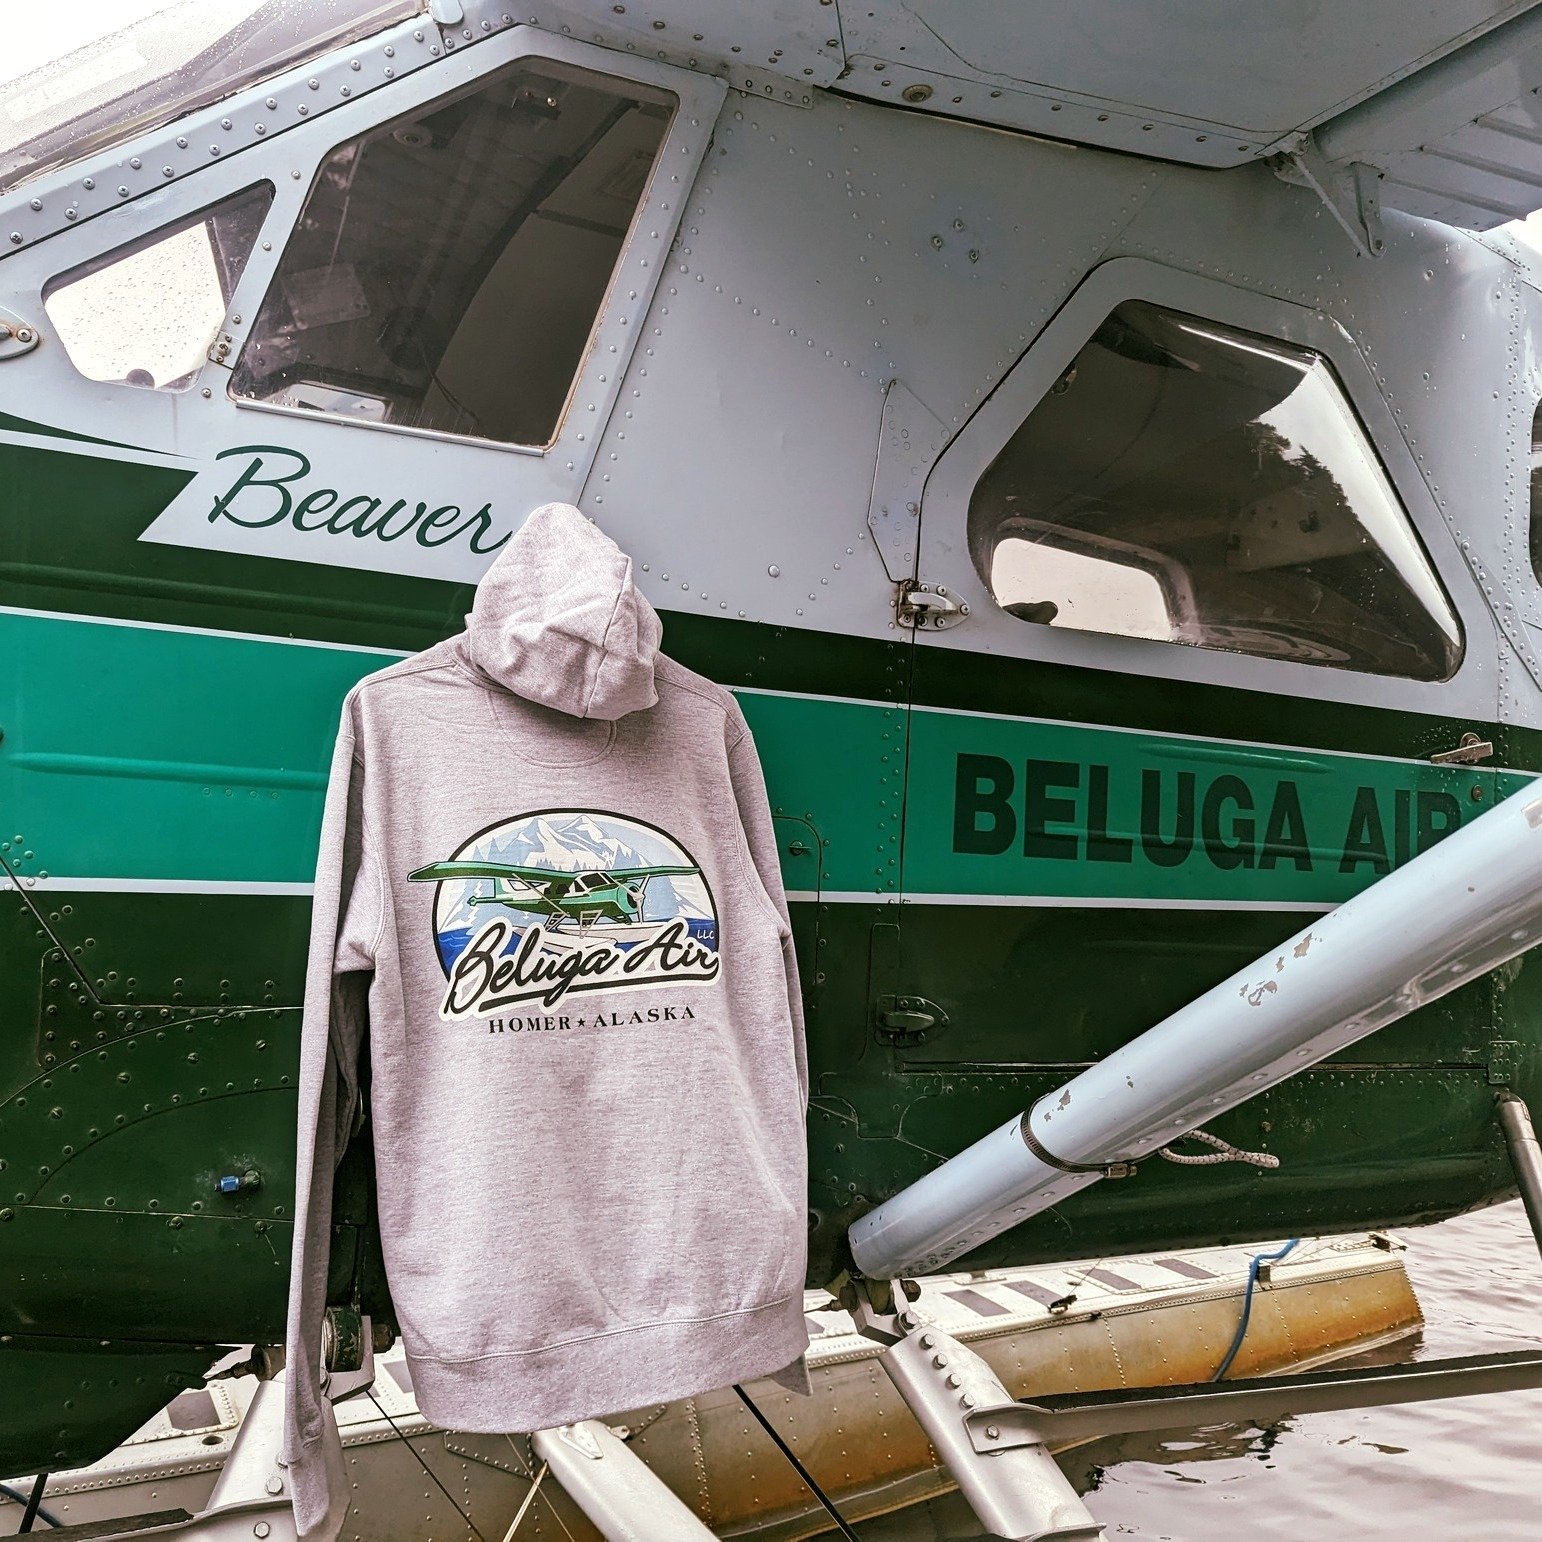 💥💥A big CONGRATULATIONS to Carly who just won a free hoodie by entering in our website customer survey giveaway!💥💥

No worries folks, there is still a chance for you to get your own Beluga Air hoodie and other BA merch by visiting our &quot;store